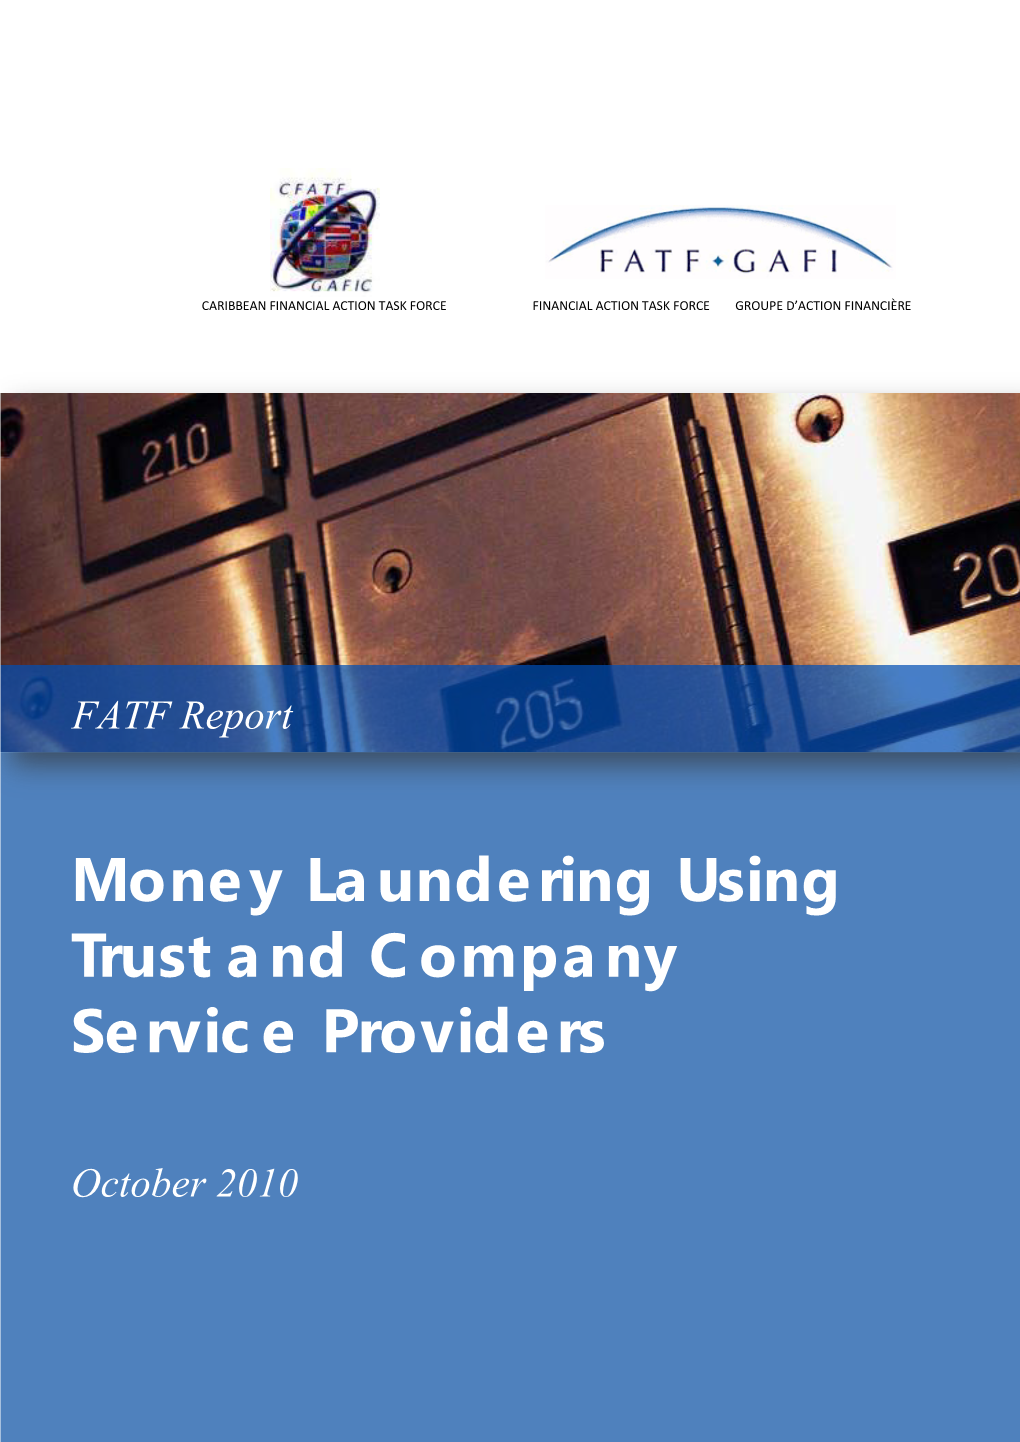 Money Laundering Using Trust and Company Service Providers